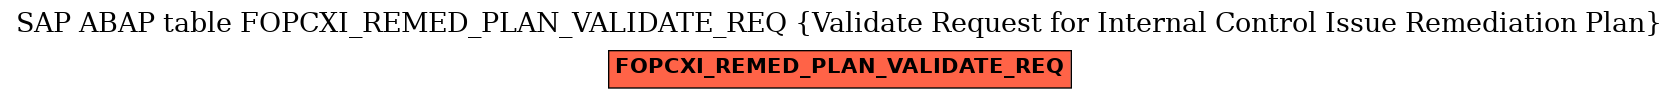 E-R Diagram for table FOPCXI_REMED_PLAN_VALIDATE_REQ (Validate Request for Internal Control Issue Remediation Plan)